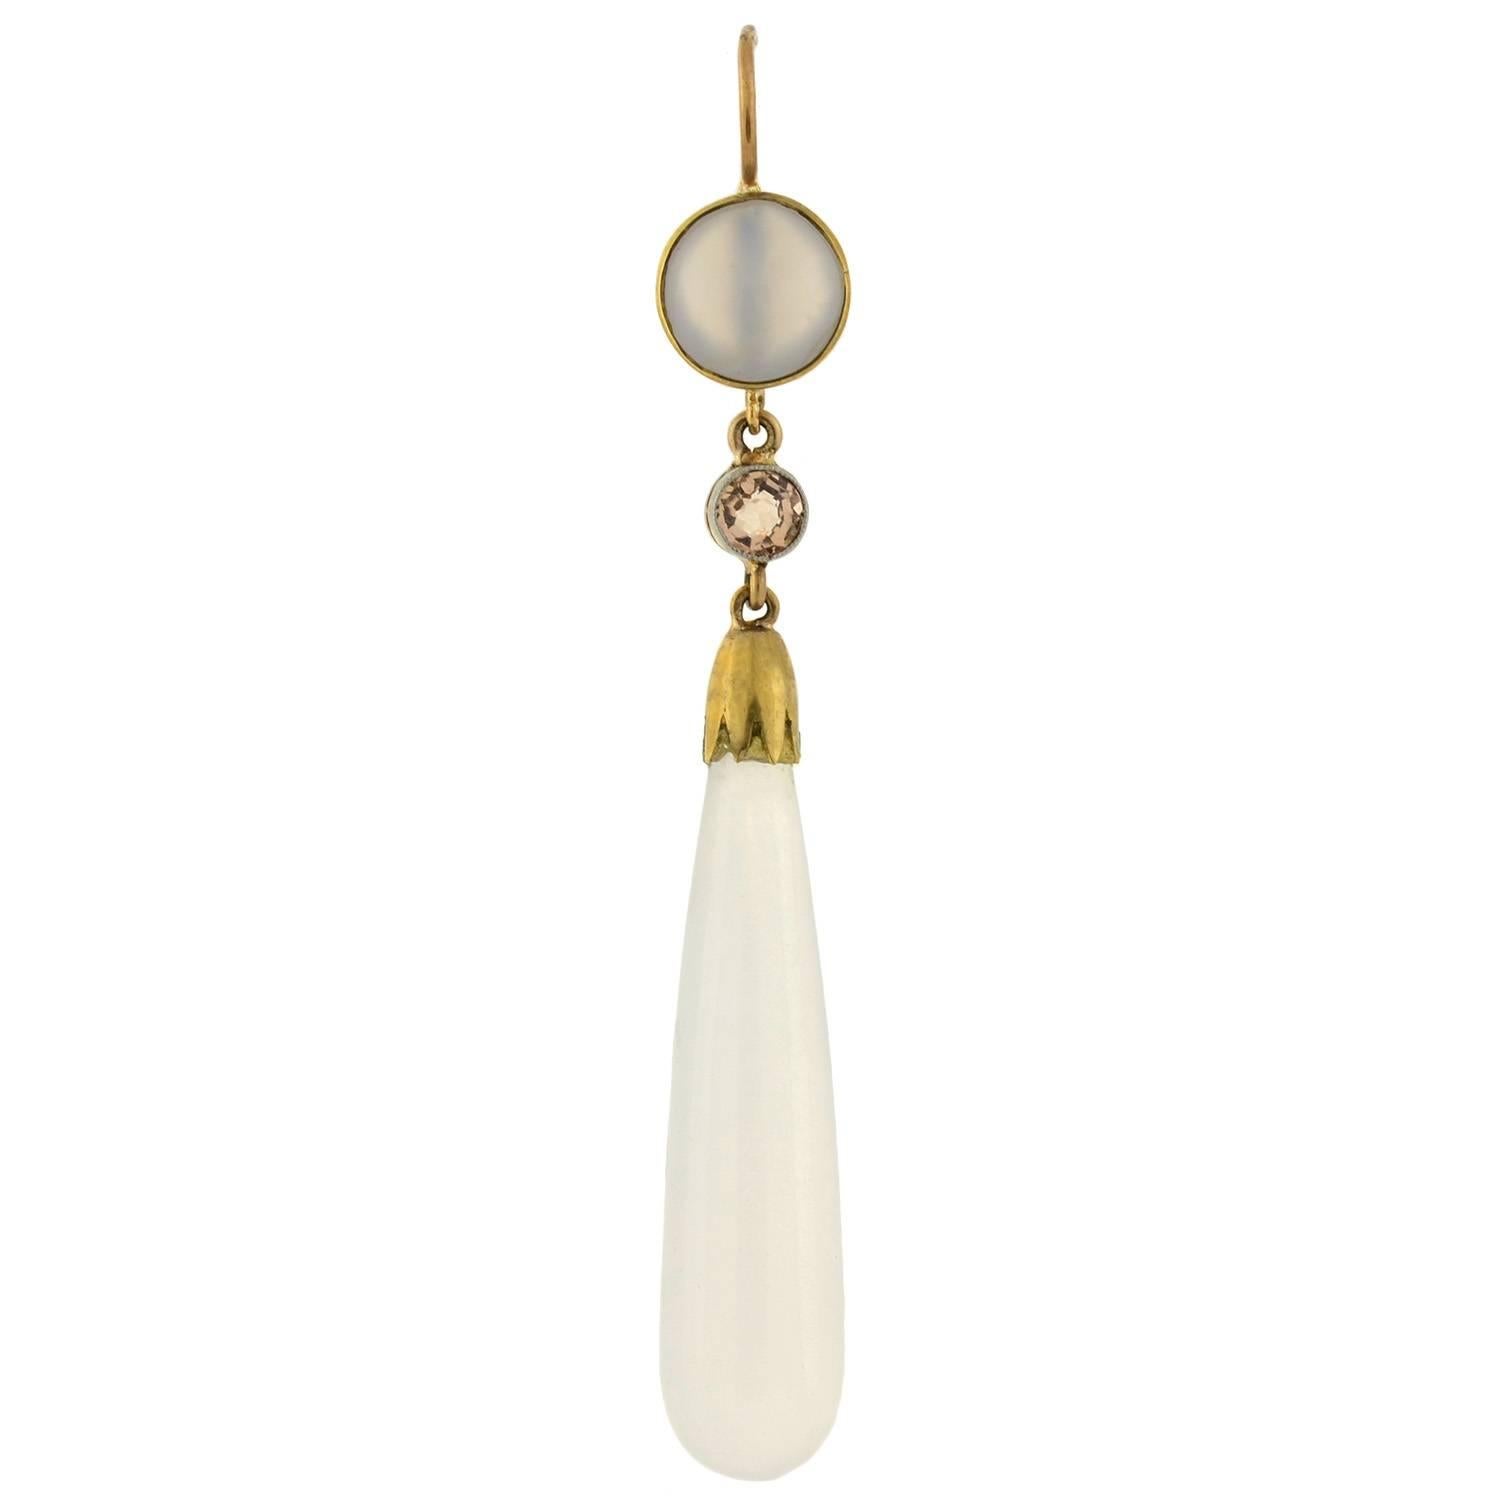 Wonderful chalcedony and zircon earrings from the Victorian (ca1880) era! Each earring begins with a bezel set chalcedony disc that rests within vibrant 14kt yellow gold. Dangling from the chalcedony surmount is a bezel set zircon. The faceted